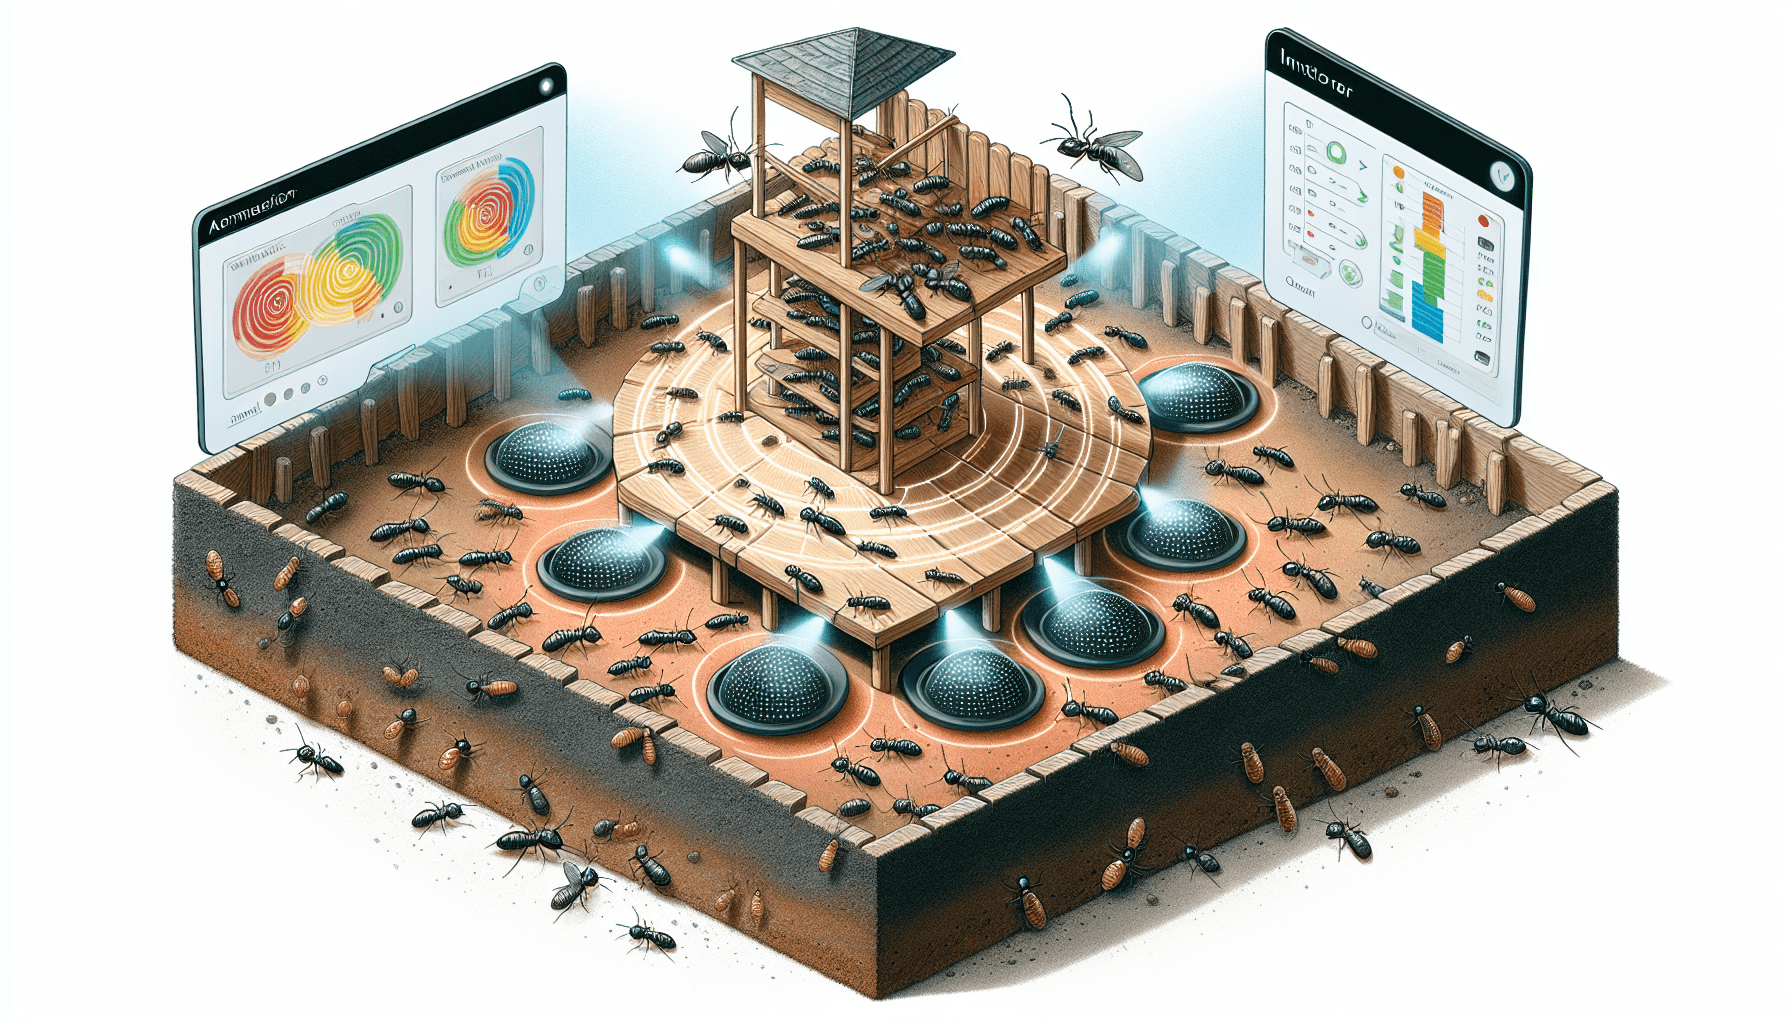 Illustration of bait stations and monitoring systems for termite treatment